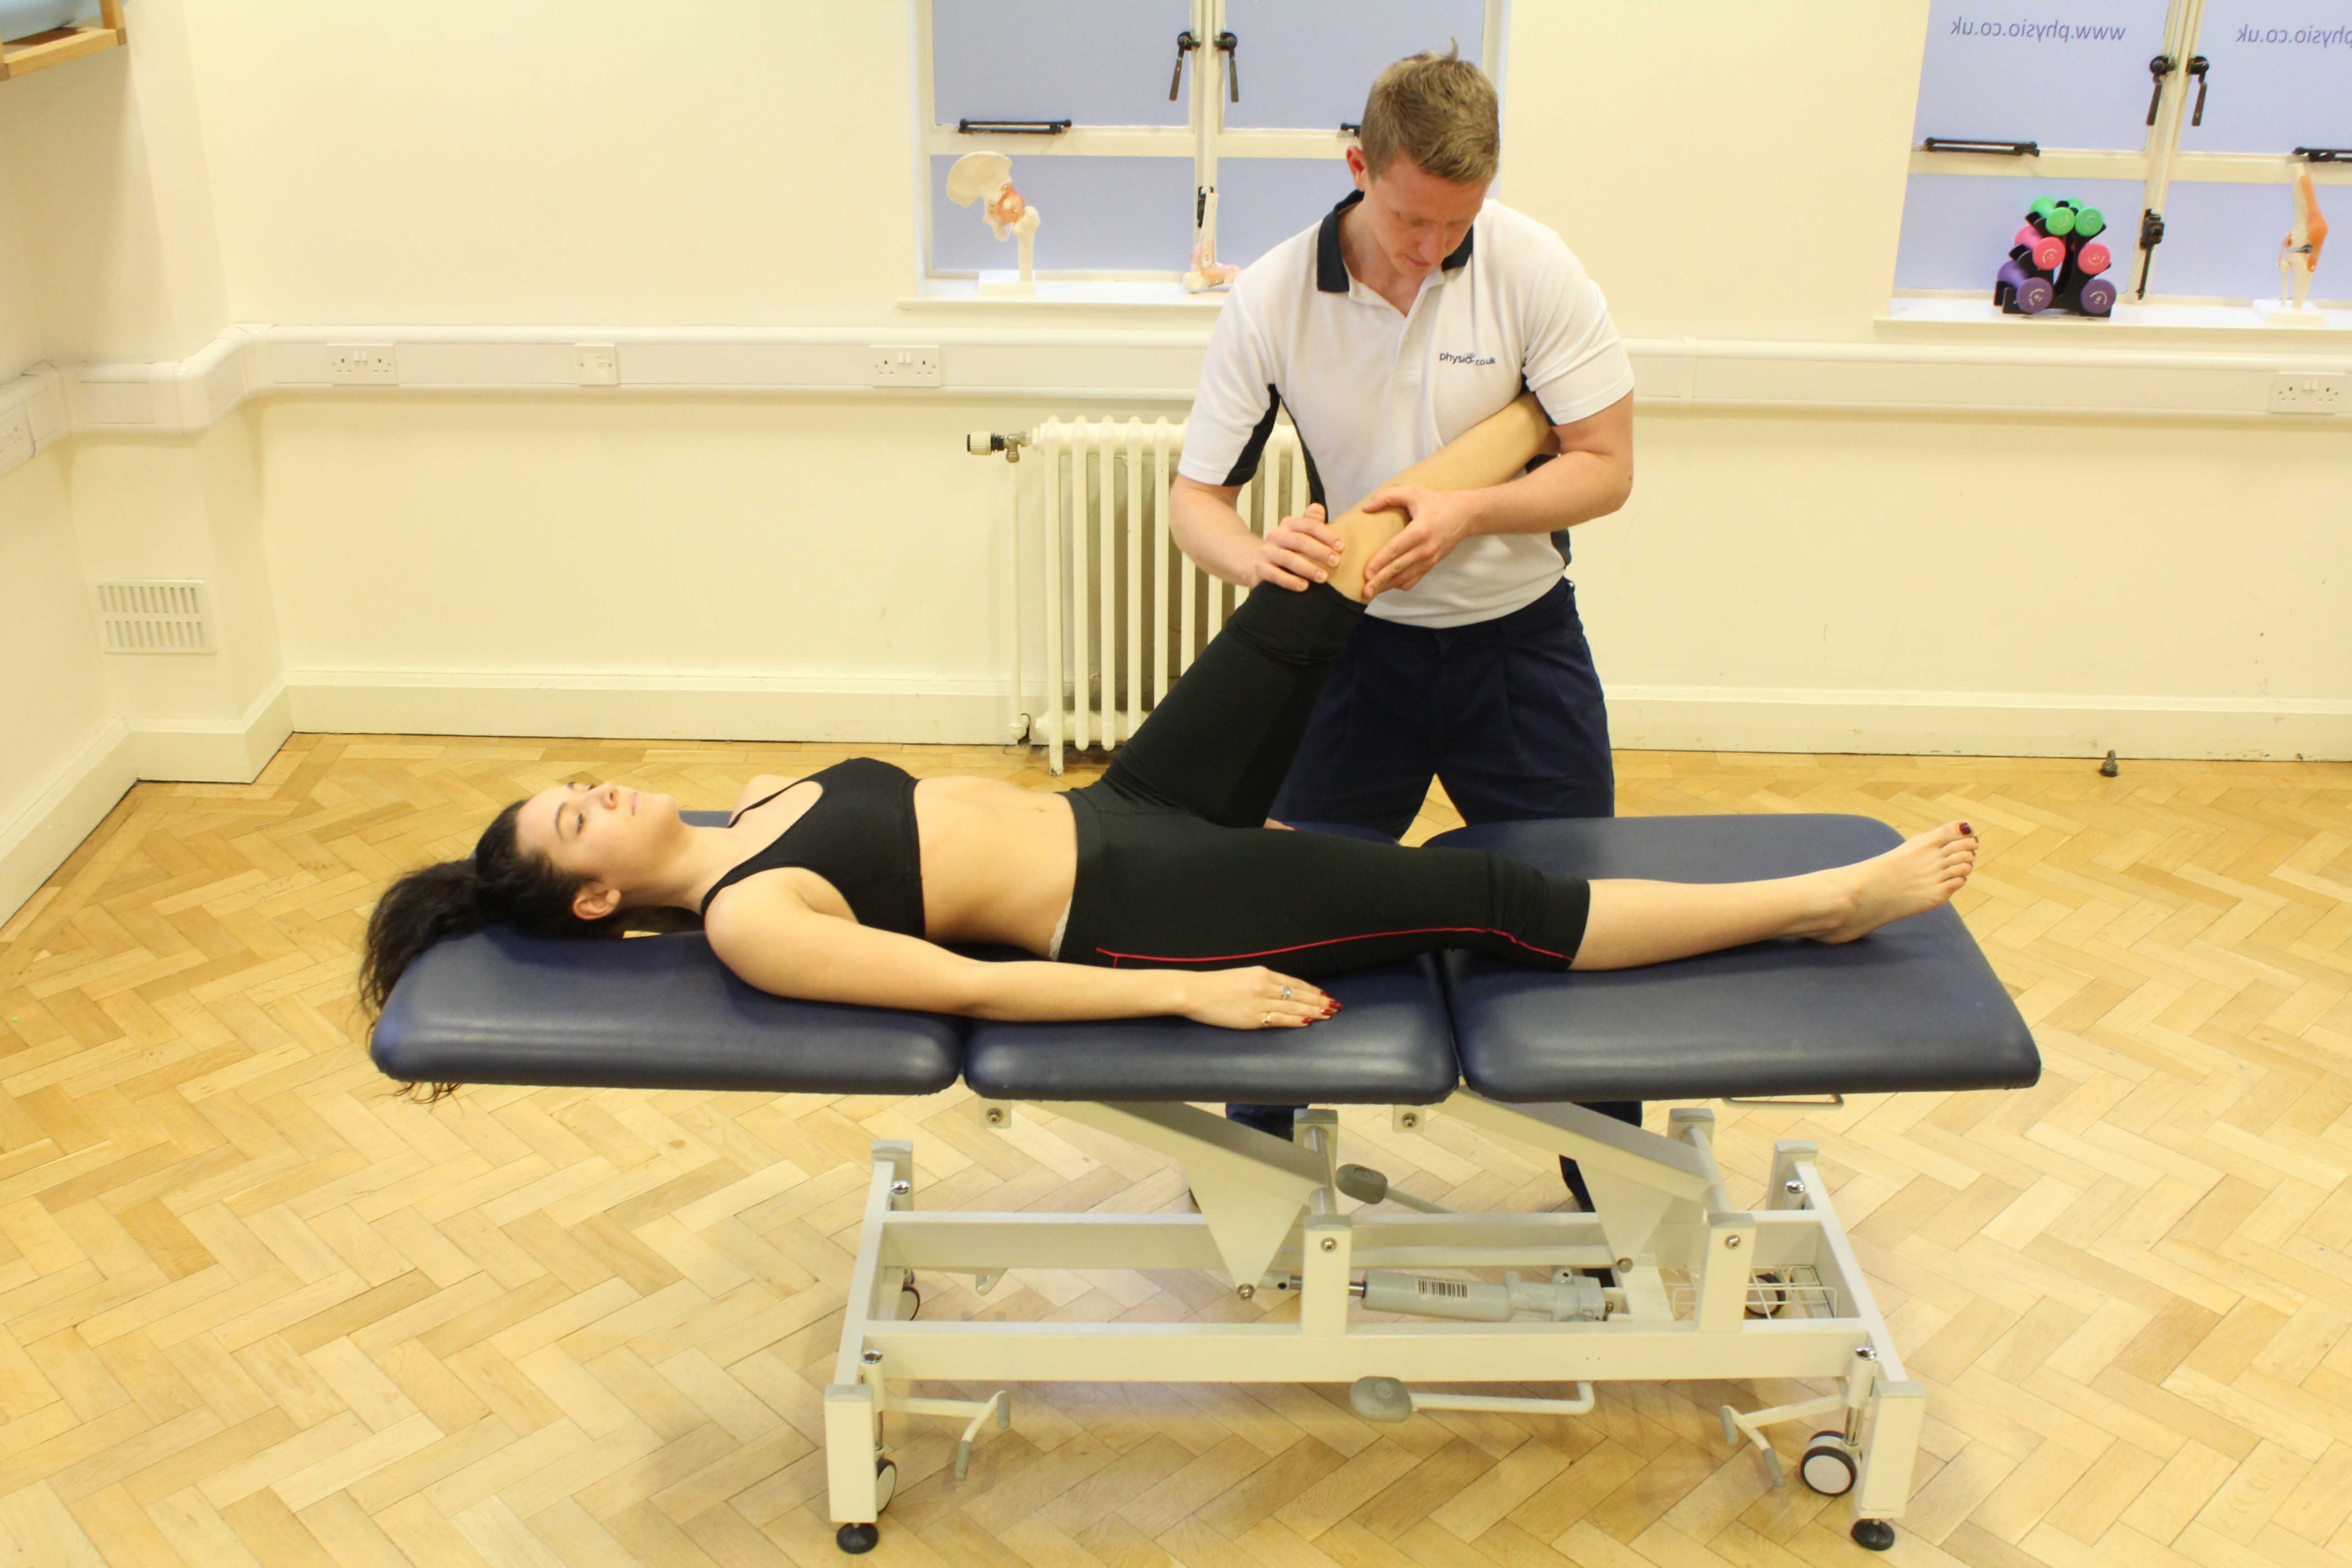 Musculoskeletal Physiotherapist assessing knee joint deformity and stability